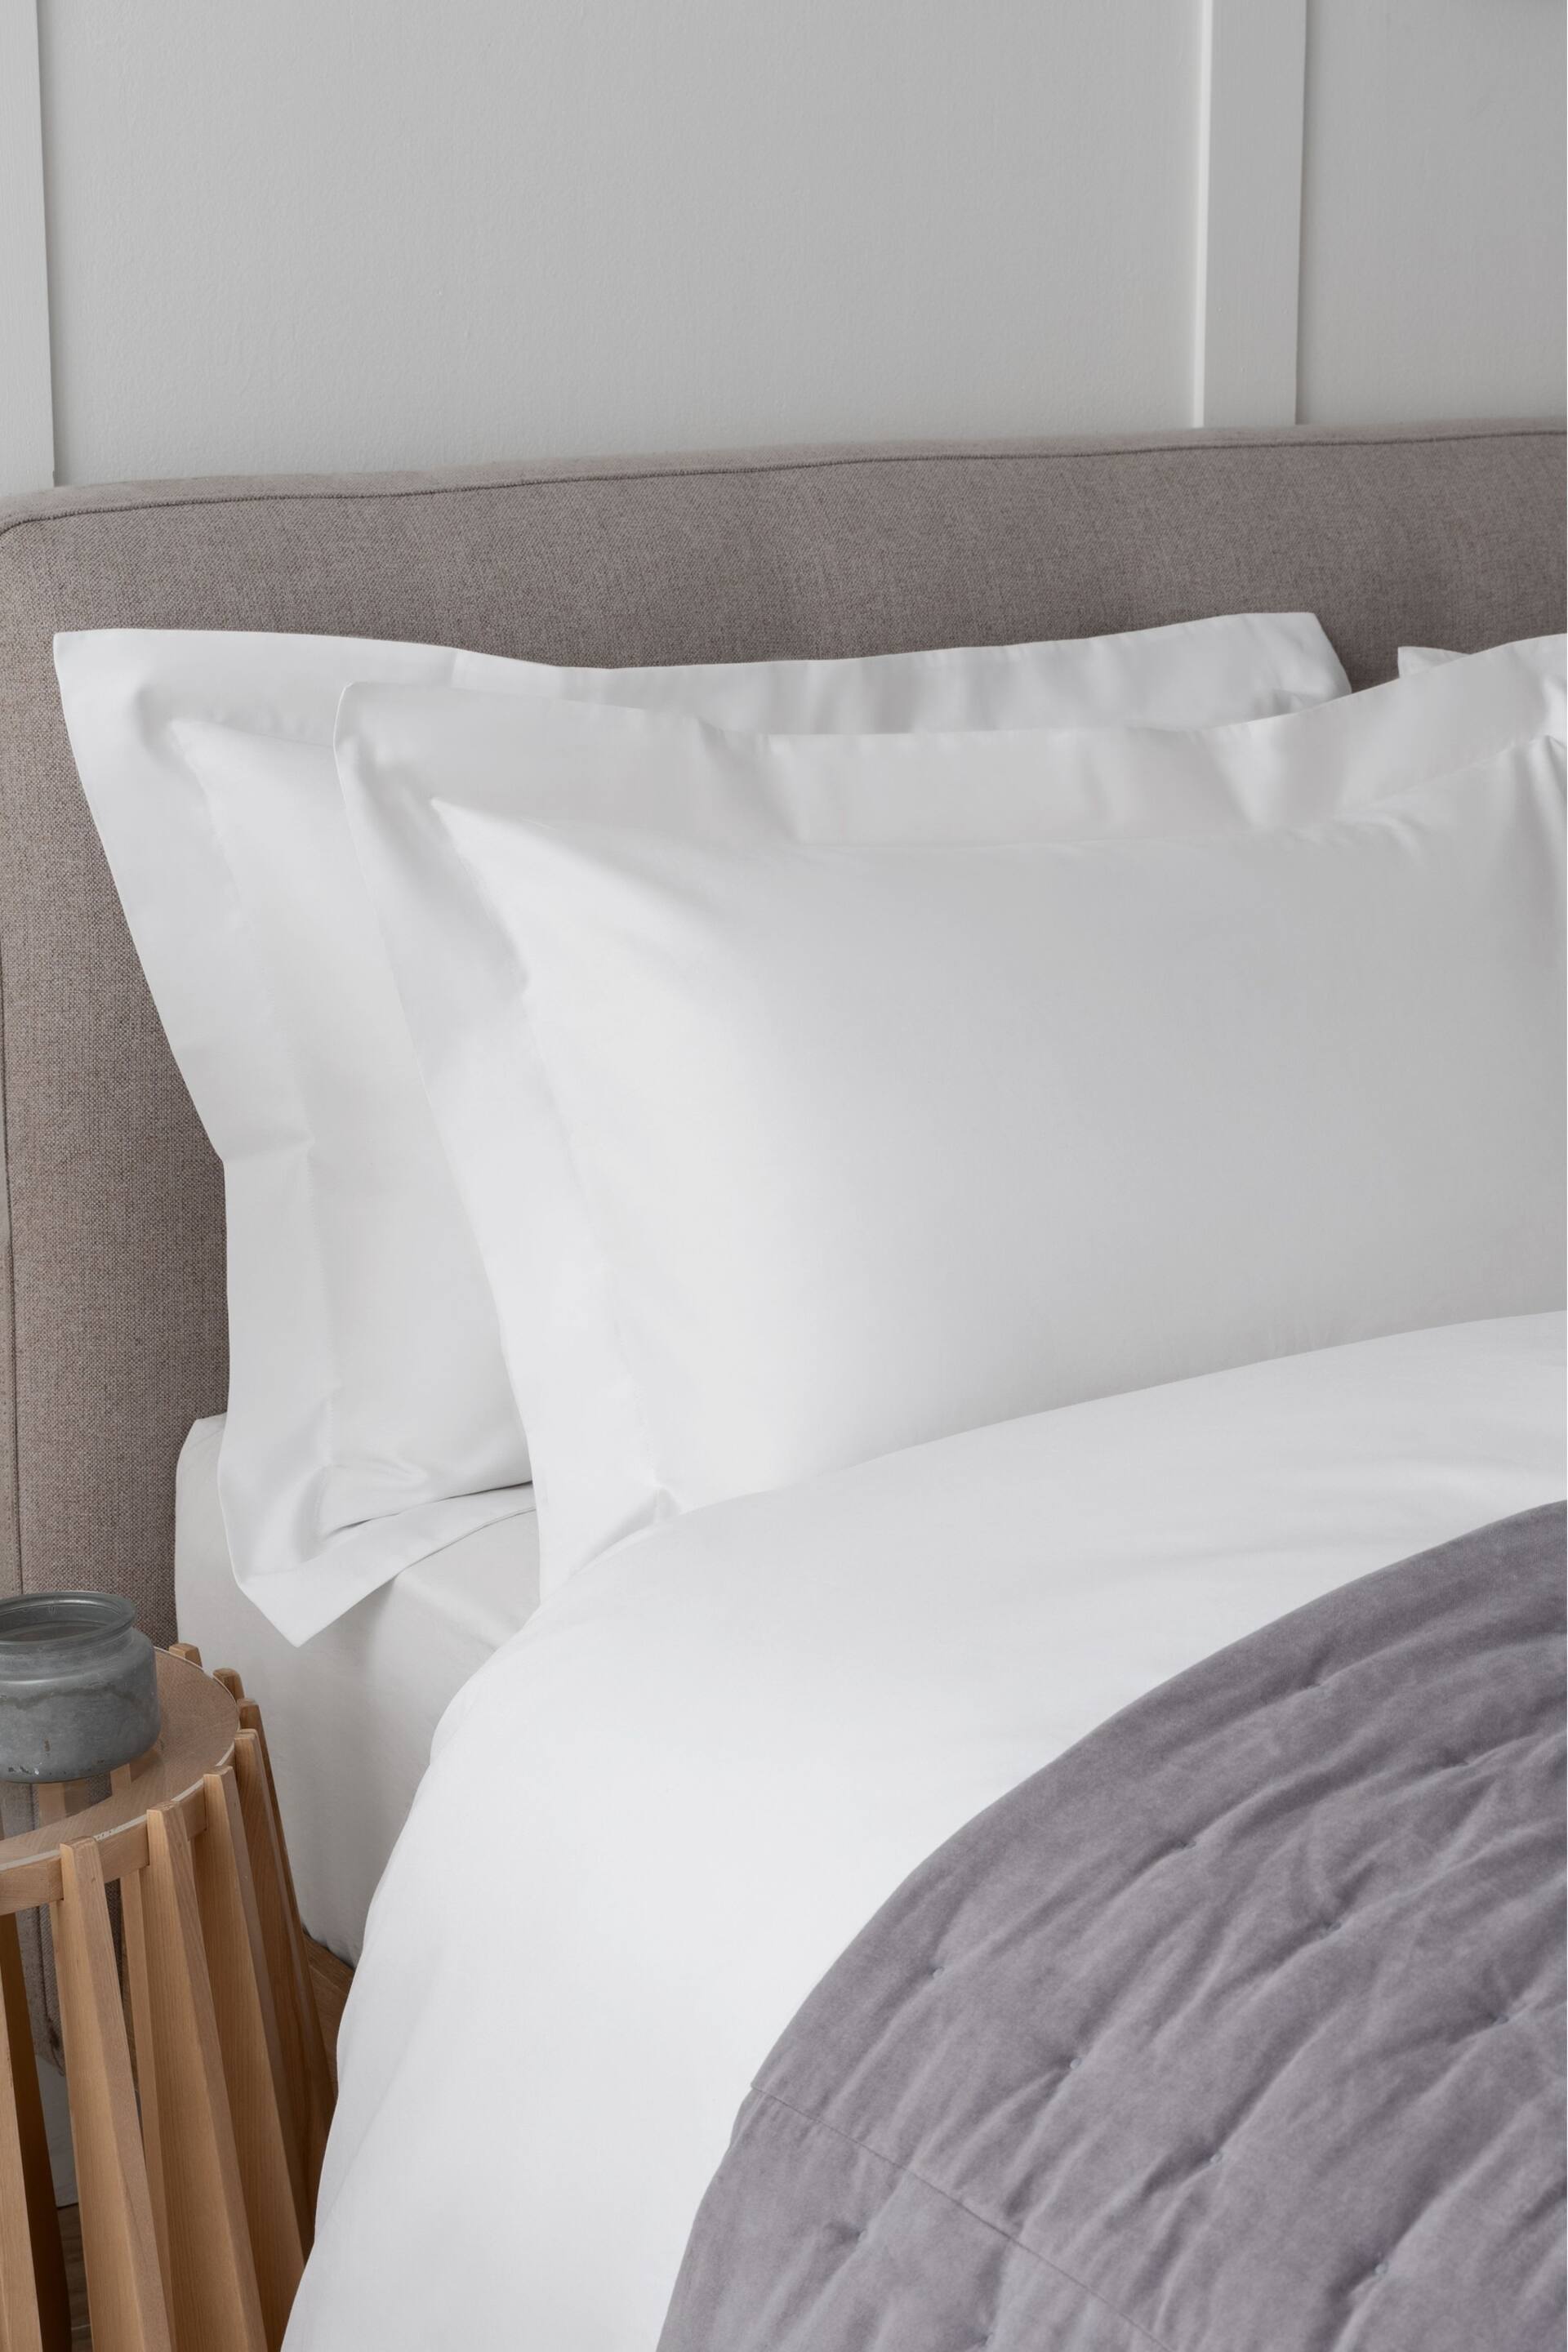 Set of 2 White Collection Luxe 400 Thread Count 100% Egyptian Cotton Pillowcases - Image 1 of 2